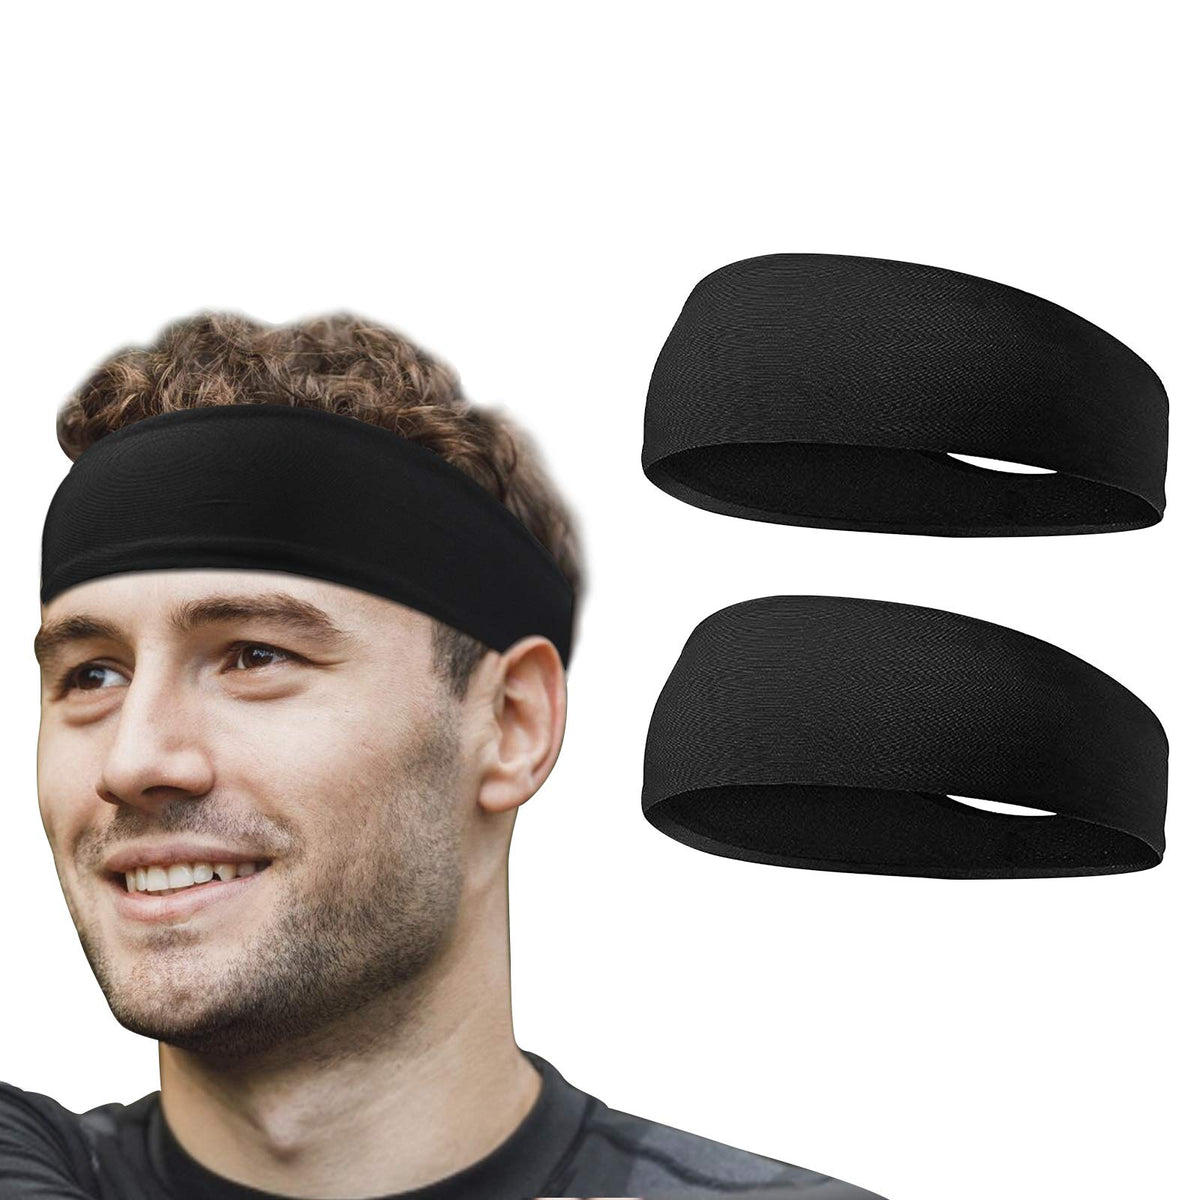 flintronic 2 PCS Elastic Sports Headbands for Men/Women - With Inner Grip Strip to Keep Headband Securely in Place | Fits ALL HEAD SIZES | Sweat Wicking Fabric to Keep your Head Dry & Cool